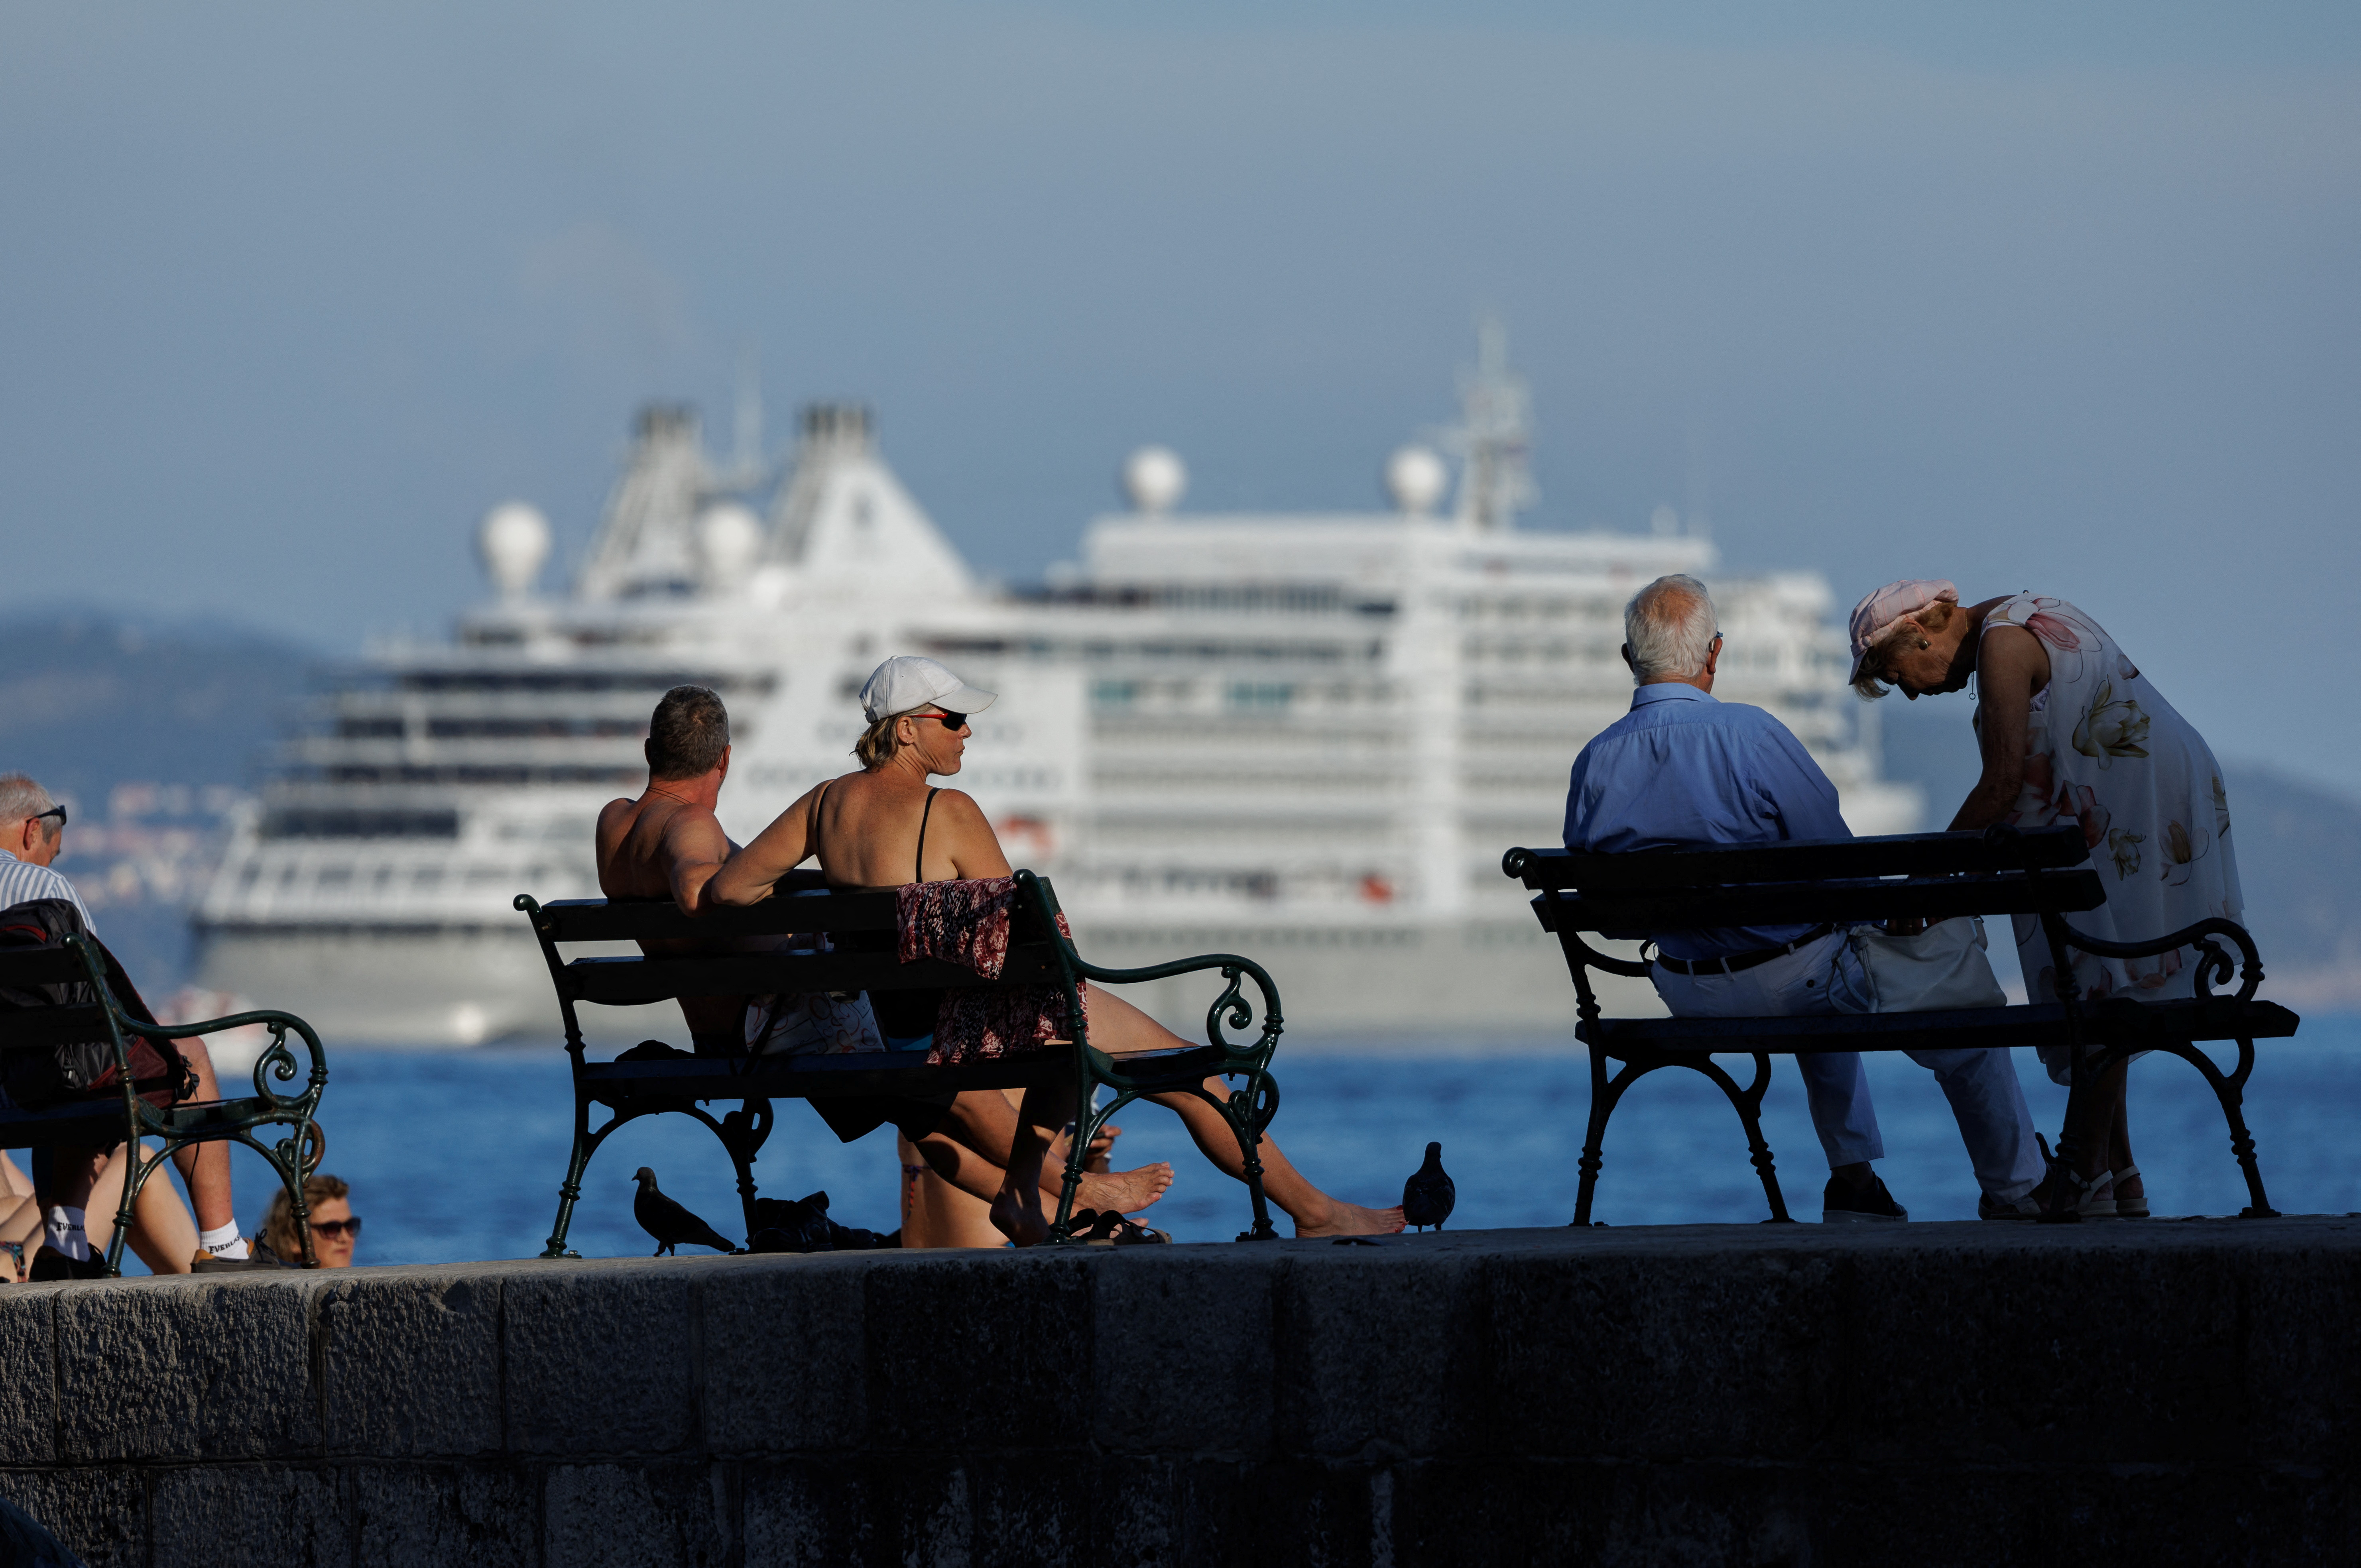 A cruise ship passes tourists resting on benches in Dubrovnik, Croatia